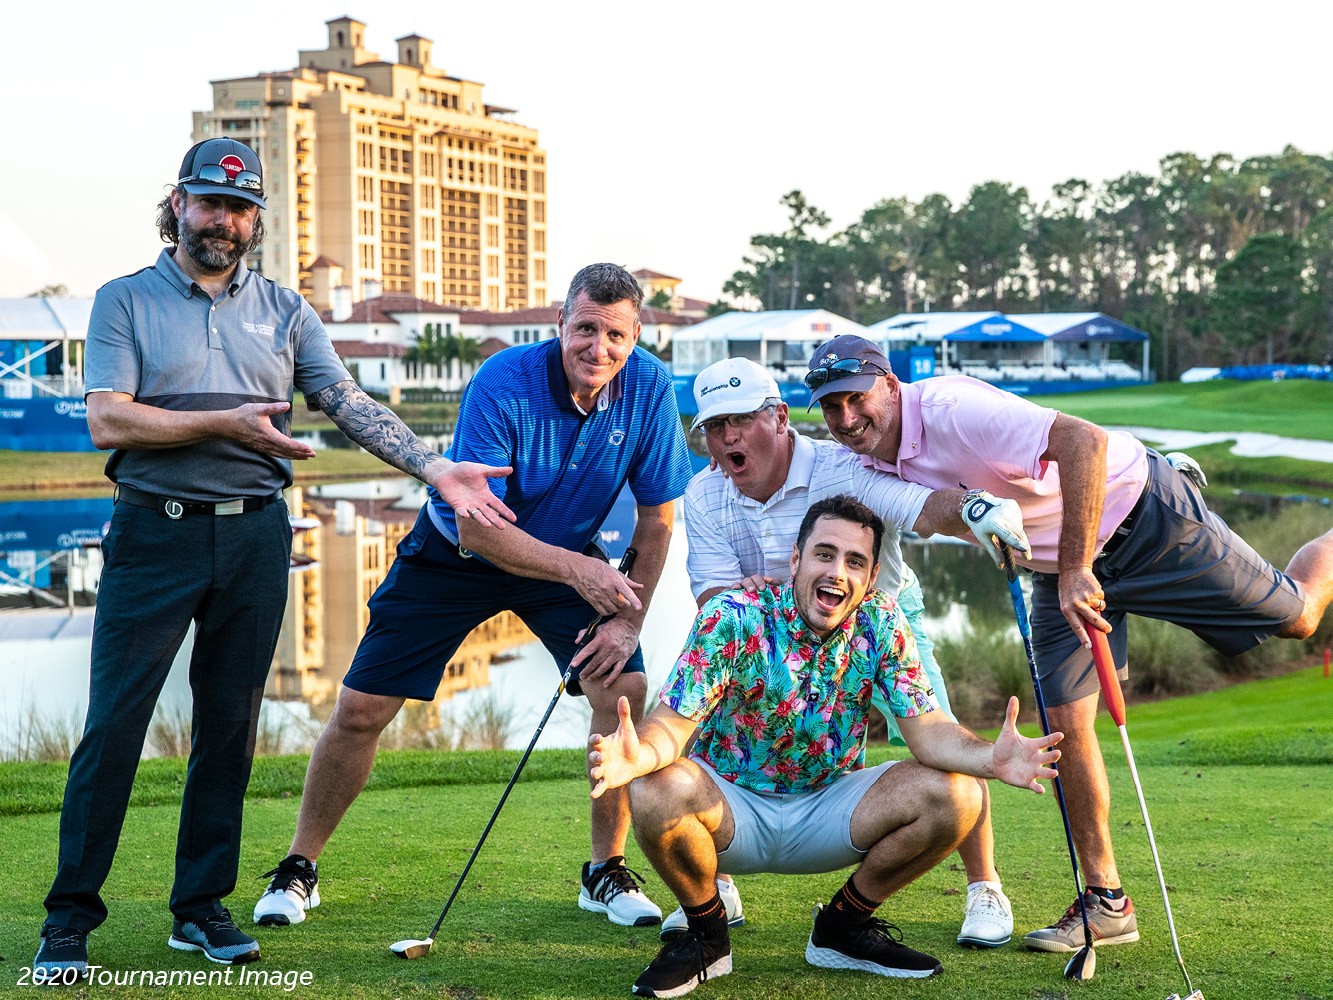 All work and no play won’t cut it at this tournament – laughs are always part of the action.